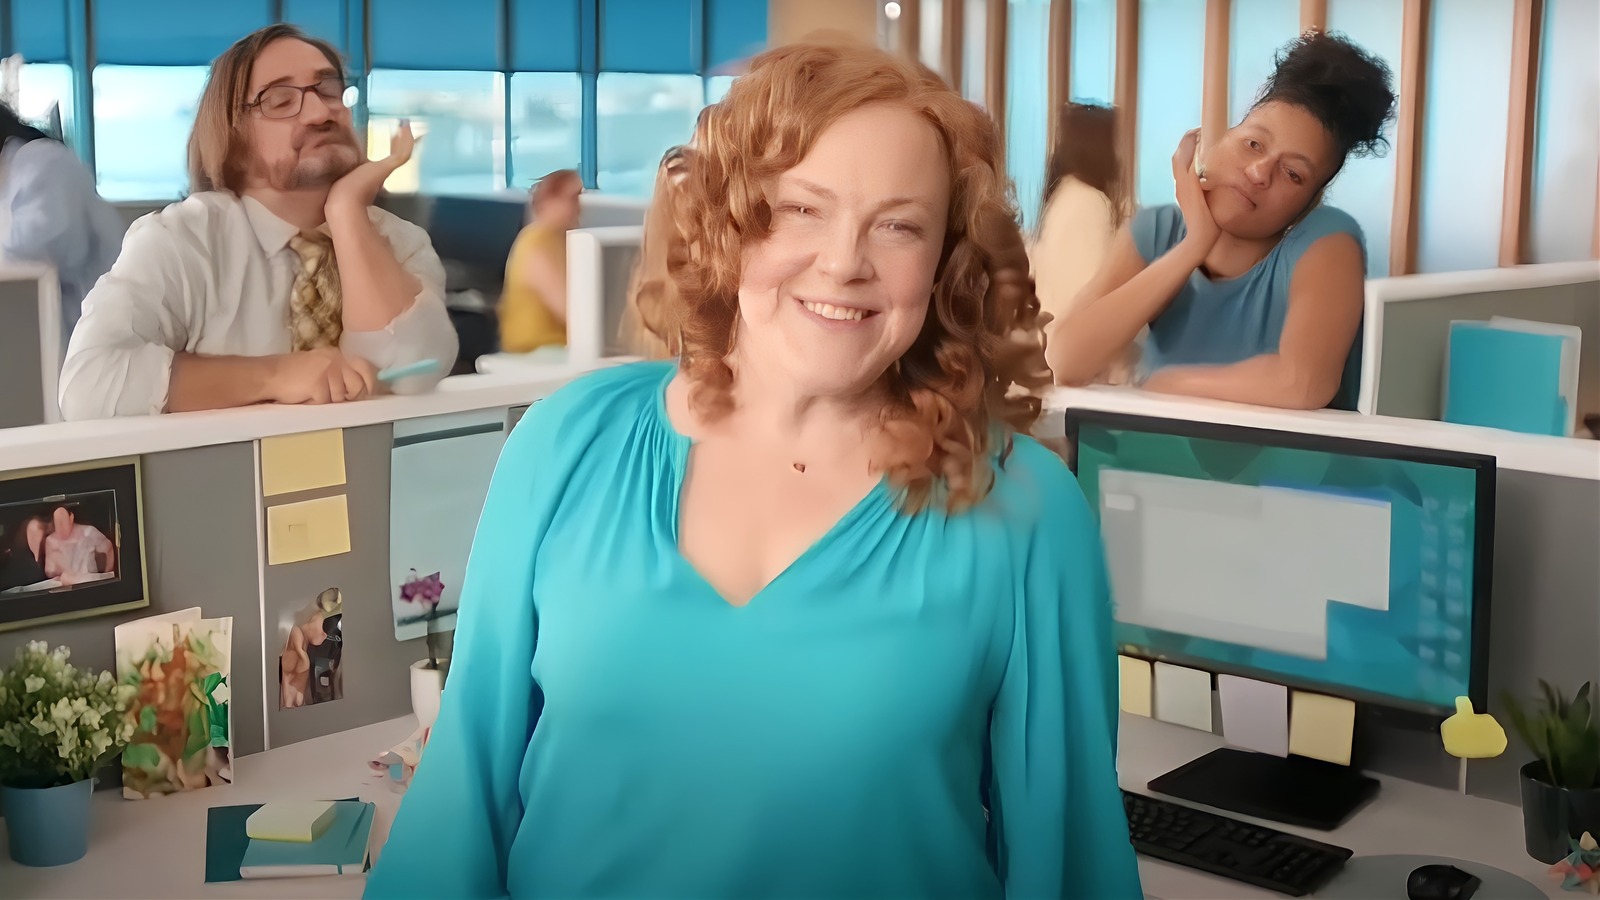 The New Jardiance Commercial Lady Has The Divided (Again)